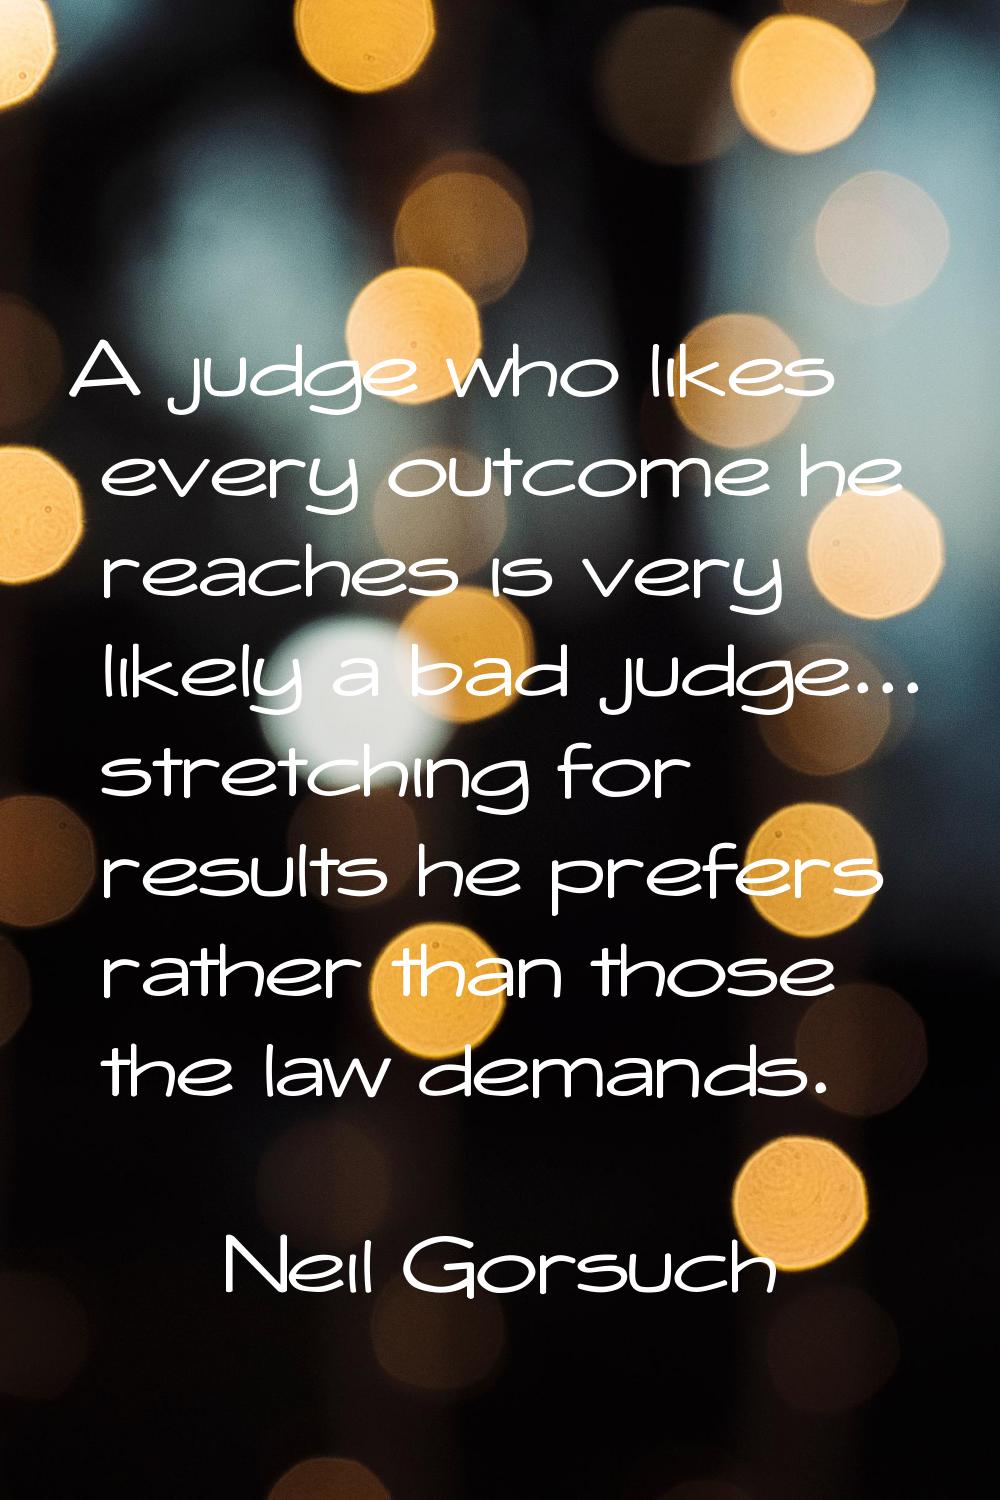 A judge who likes every outcome he reaches is very likely a bad judge... stretching for results he 